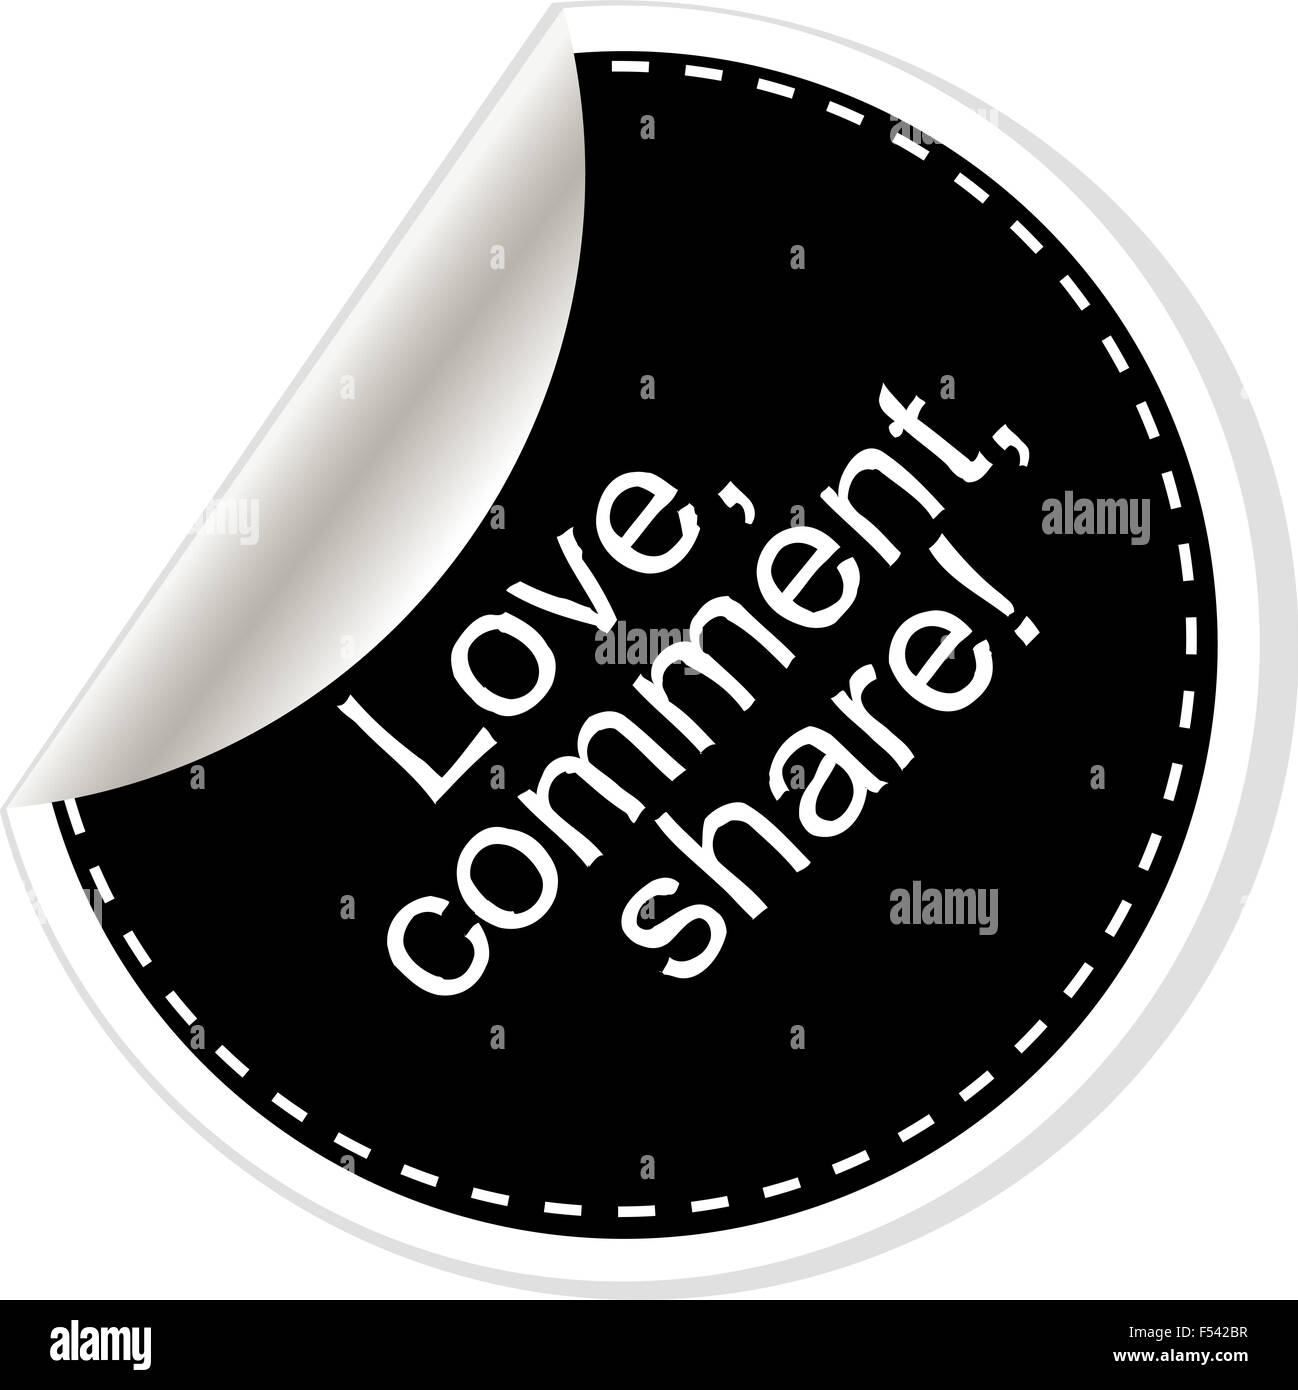 Love. Comment. Share. Inspirational motivational quote. Simple trendy design. Black and white stickers. Stock Photo